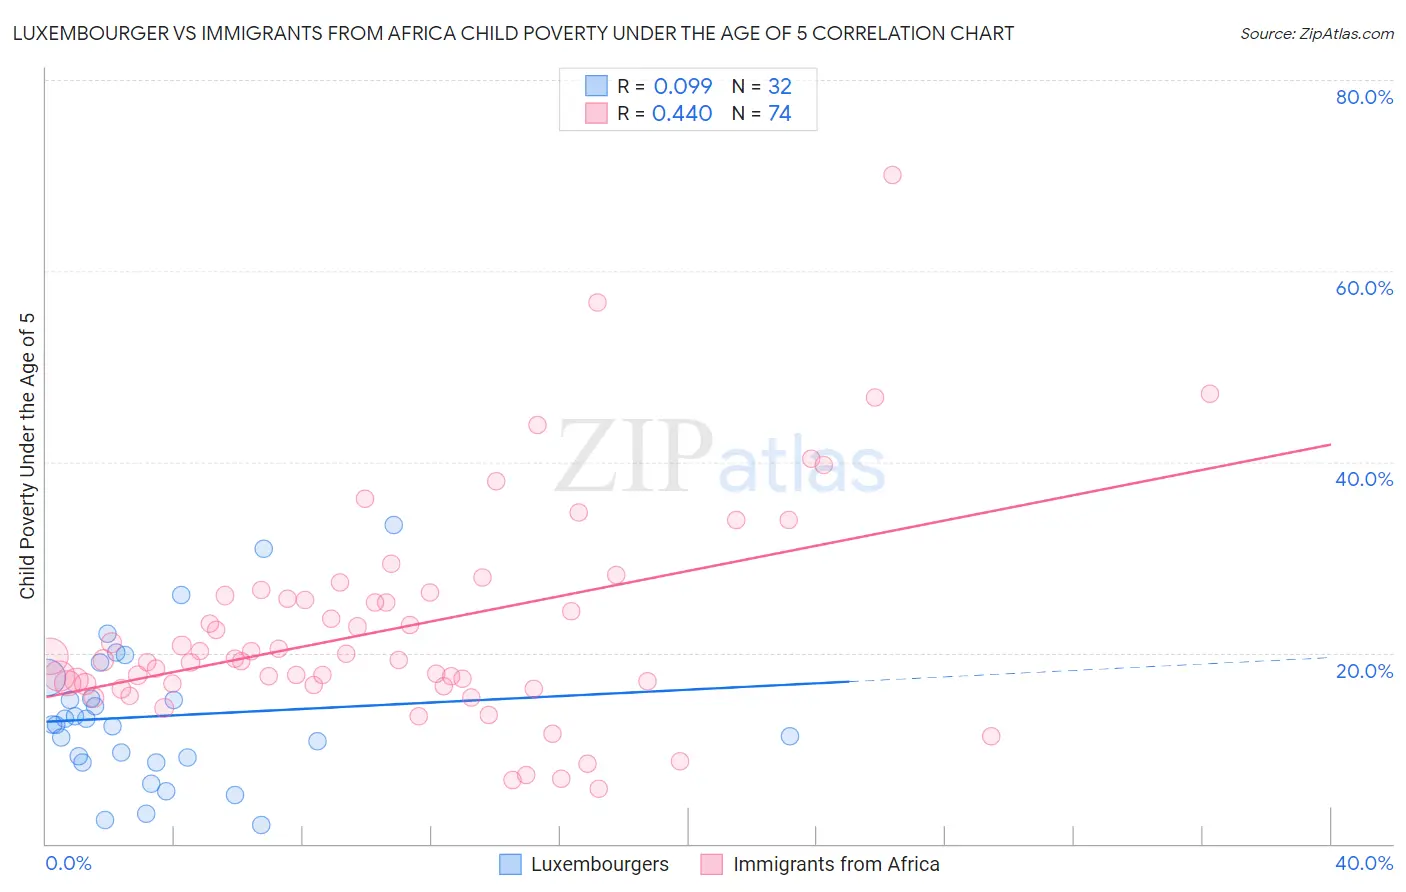 Luxembourger vs Immigrants from Africa Child Poverty Under the Age of 5